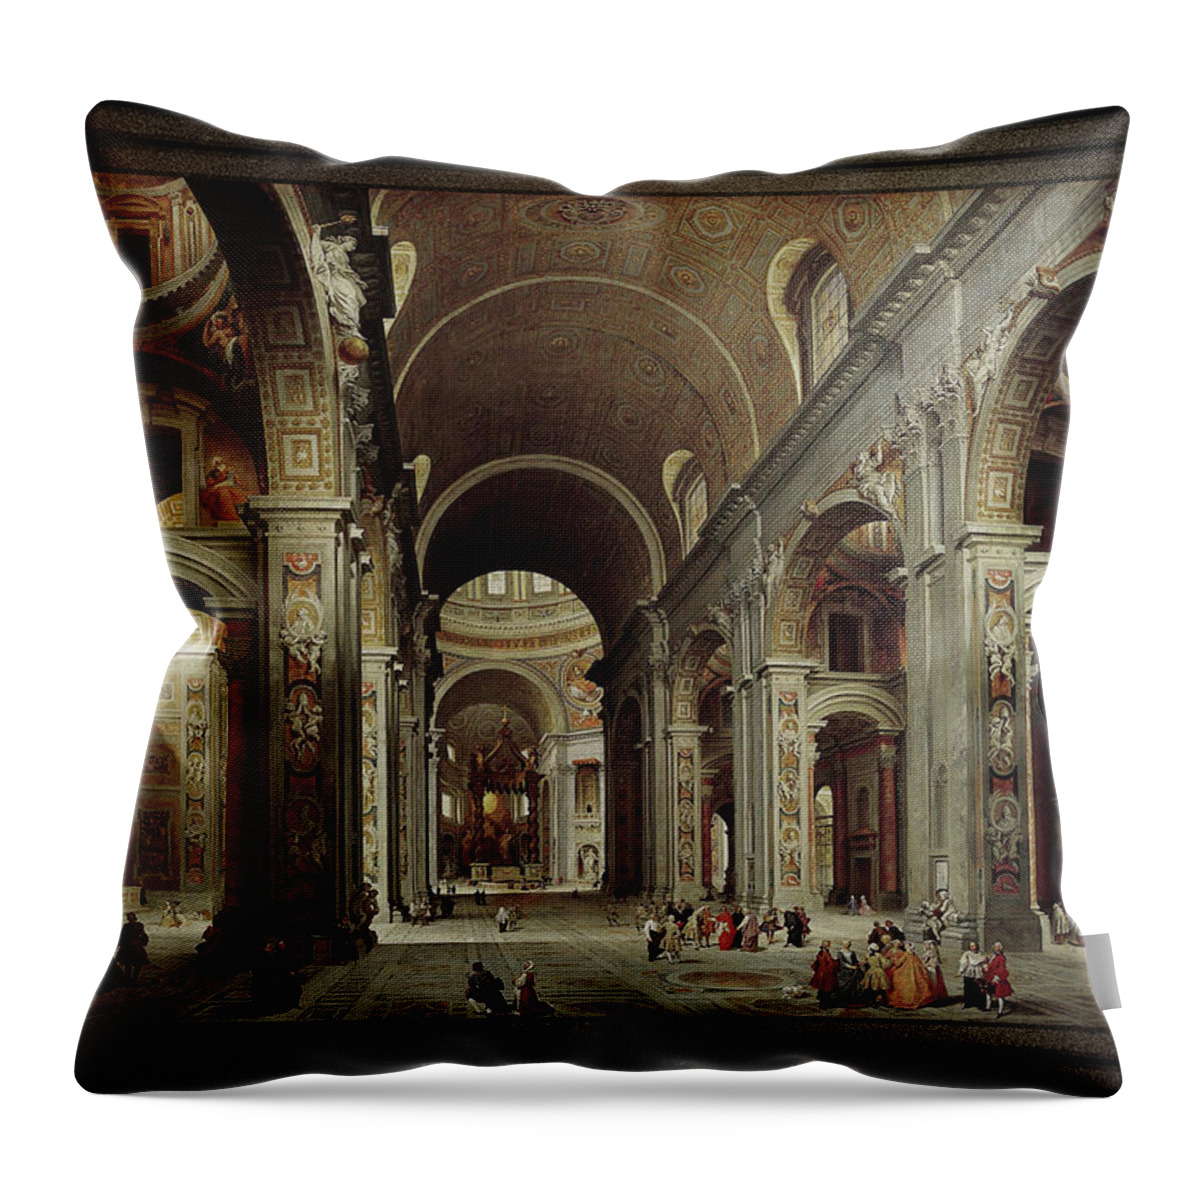 The Nave Of St. Peter's Basilica Throw Pillow featuring the painting The Nave of St Peter's Basilica in the Vatican c1735 by Giovanni Paolo Pannini by Rolando Burbon